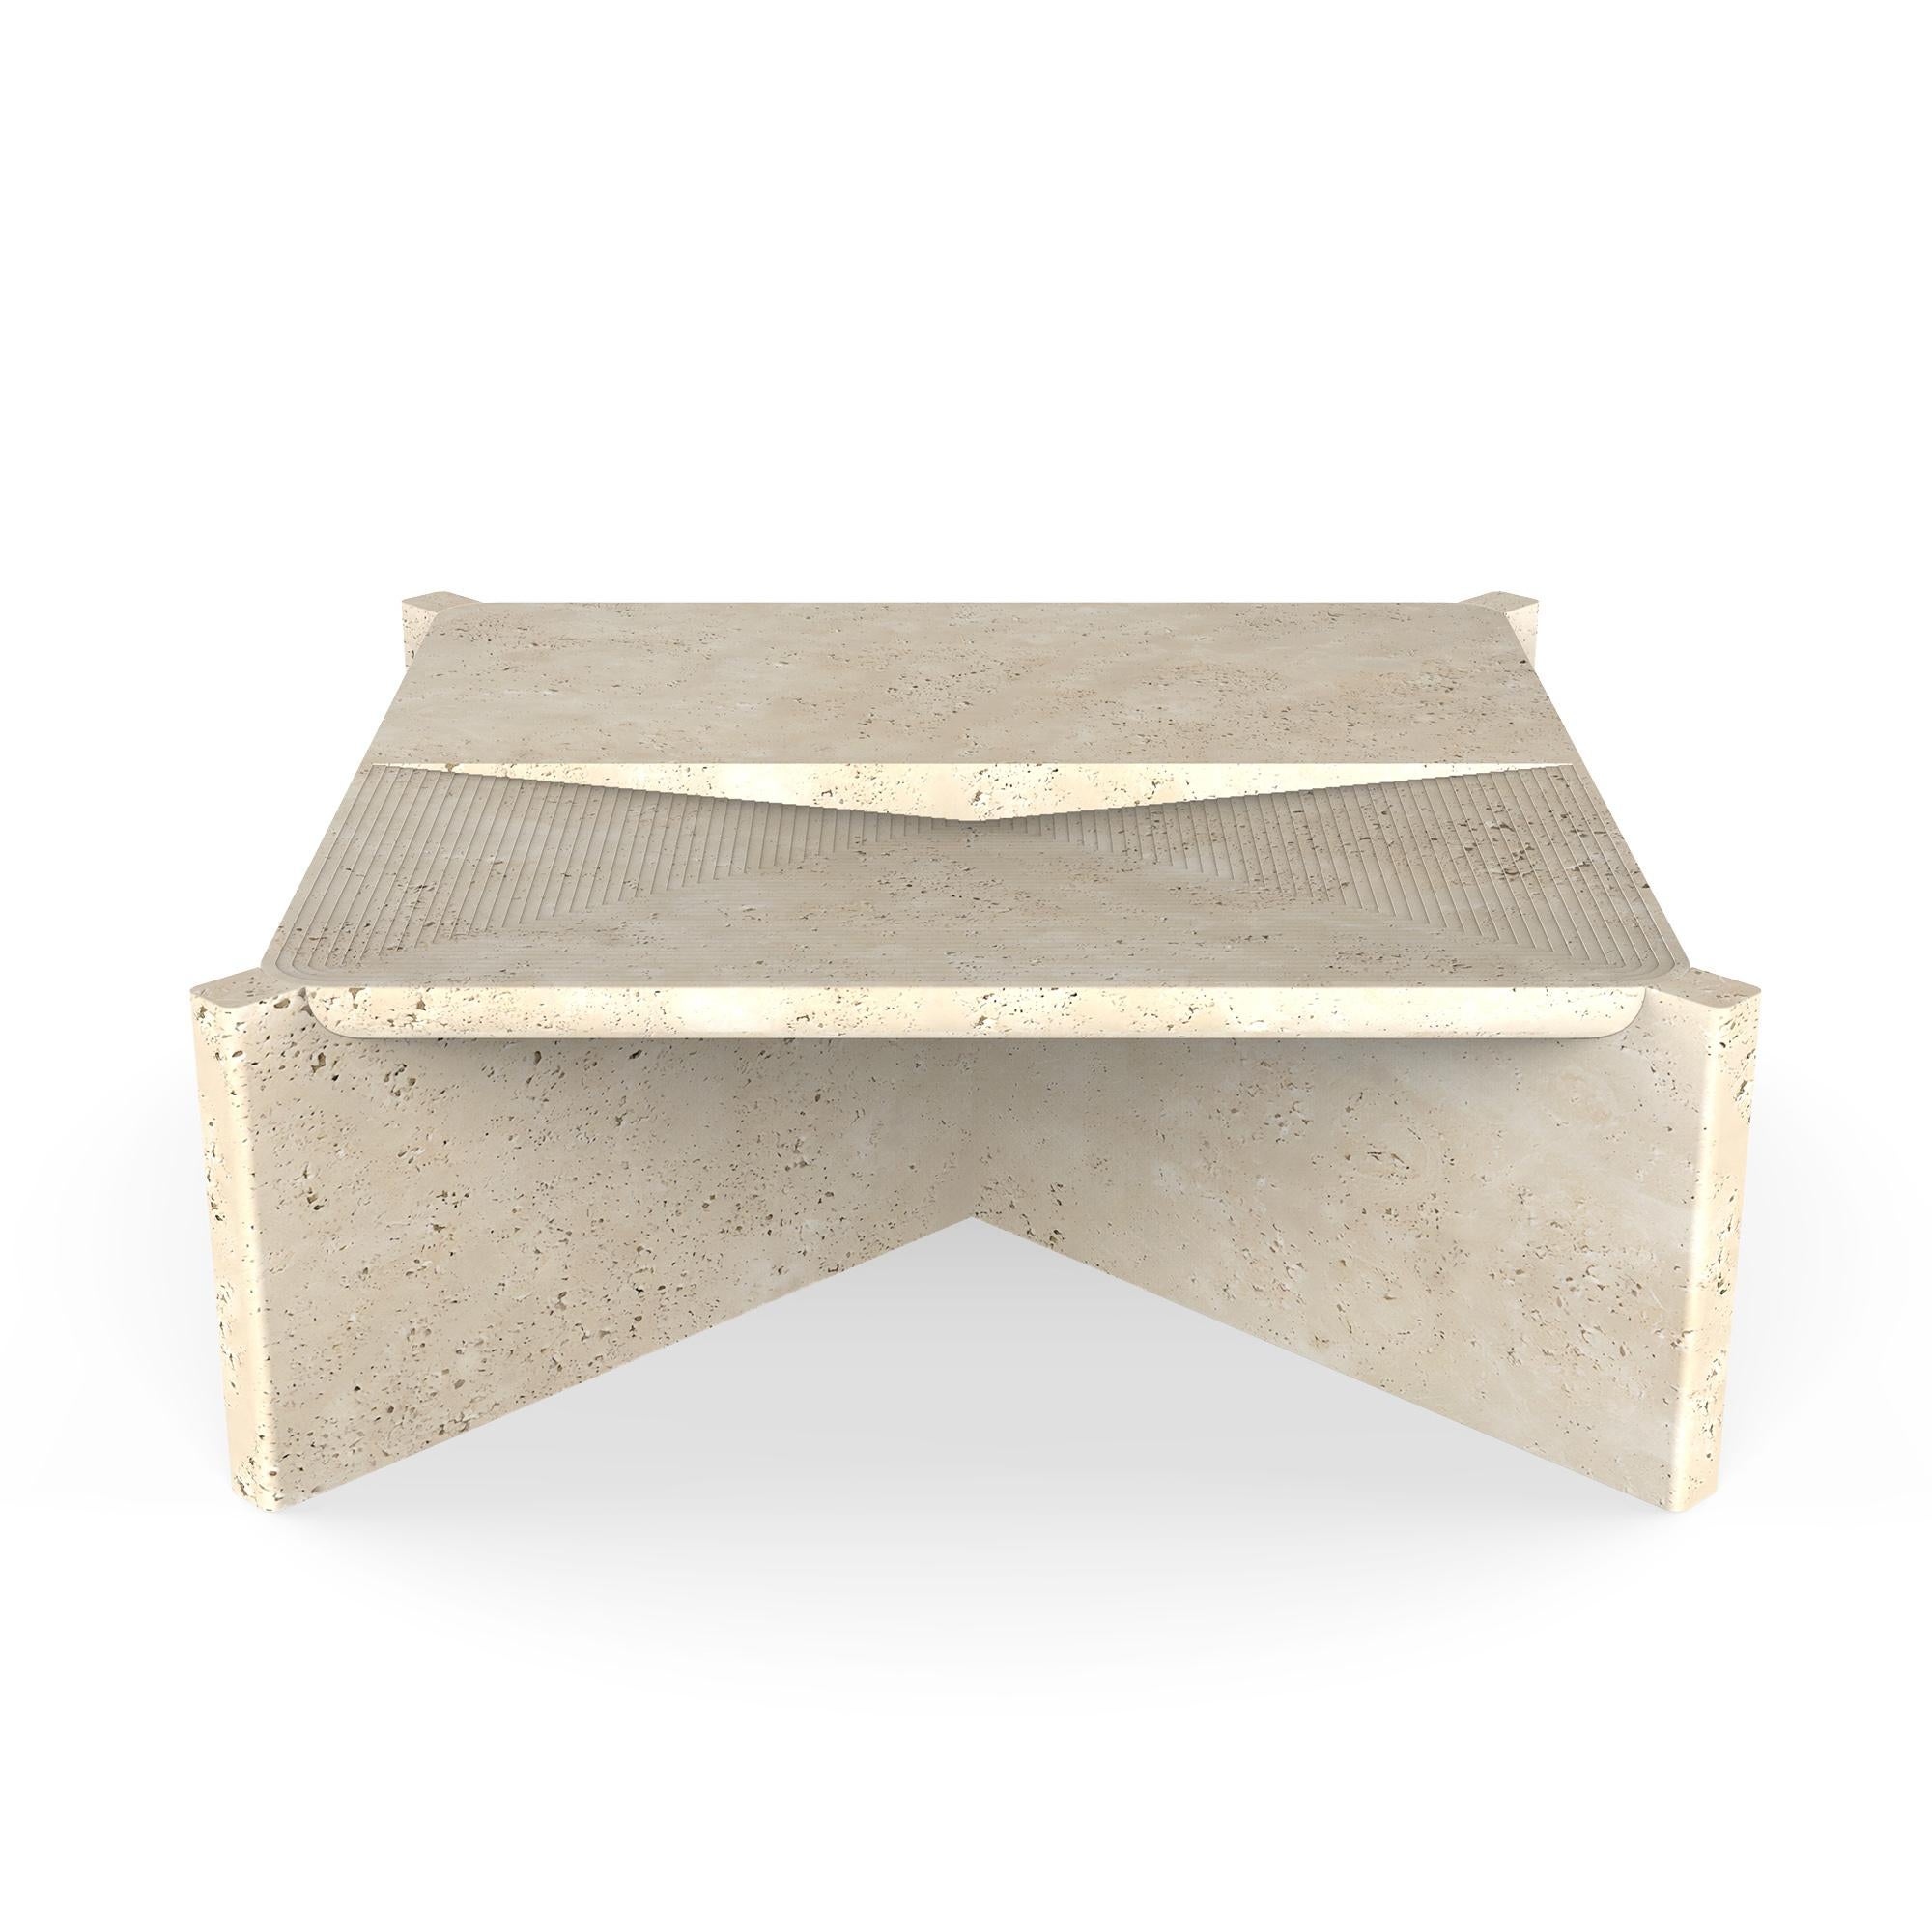 Turkish Arkhe No 1 Coffee Table Square Travertine, Modern Sculptural by Fulden Topaloglu For Sale